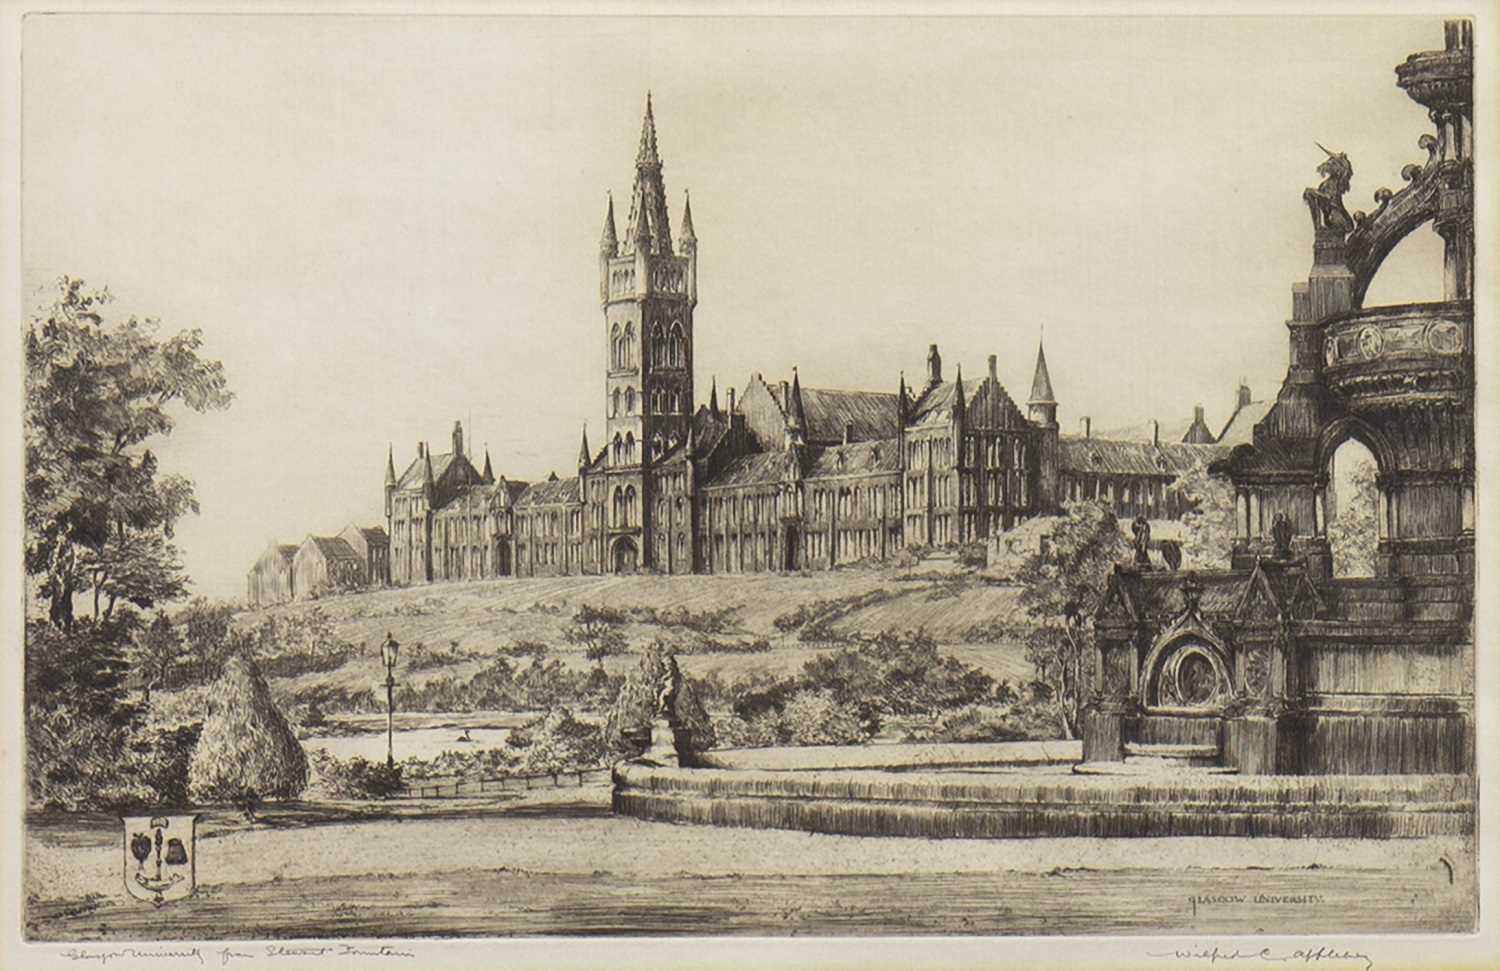 Lot 428 - UNIVERSITY OF GLASGOW, AN ETCHING BY APPLEBY